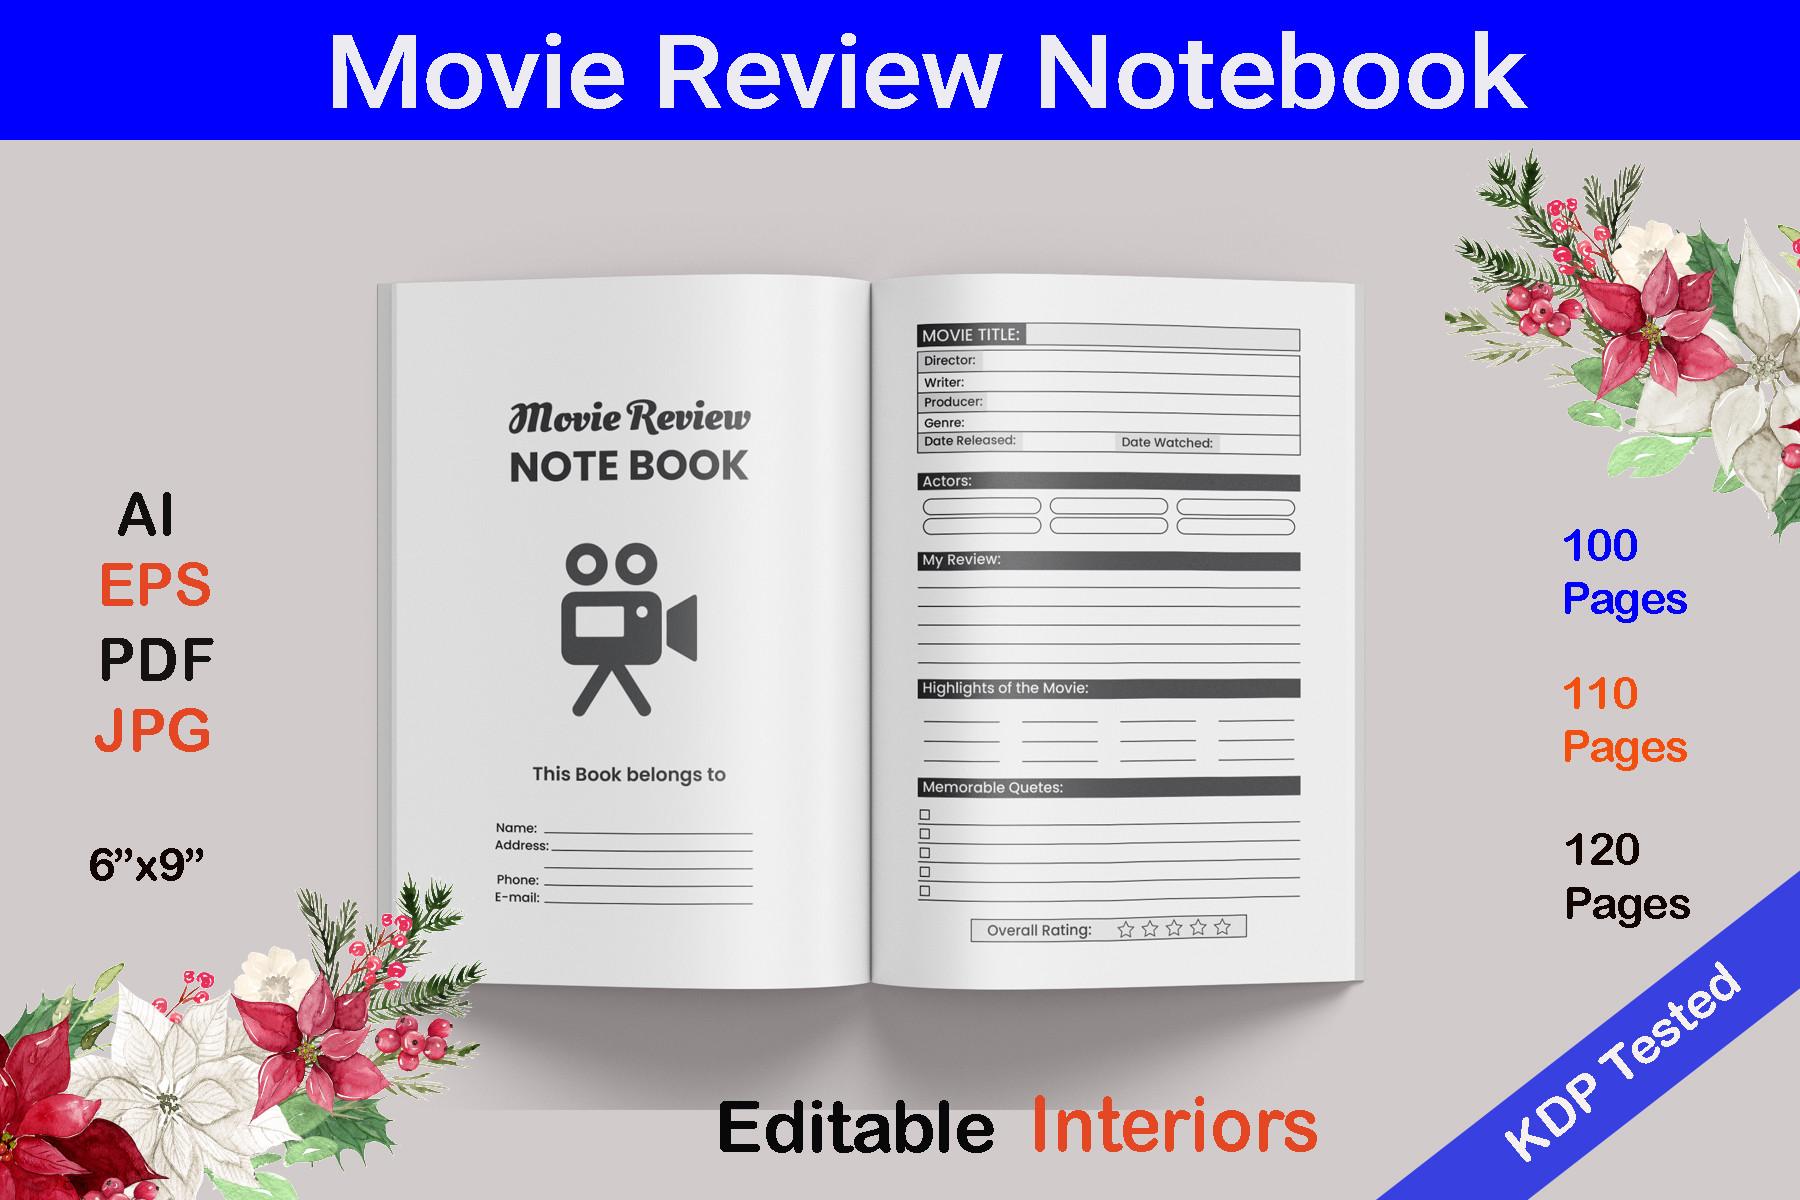 Movie Review Notebook Interior for KDP